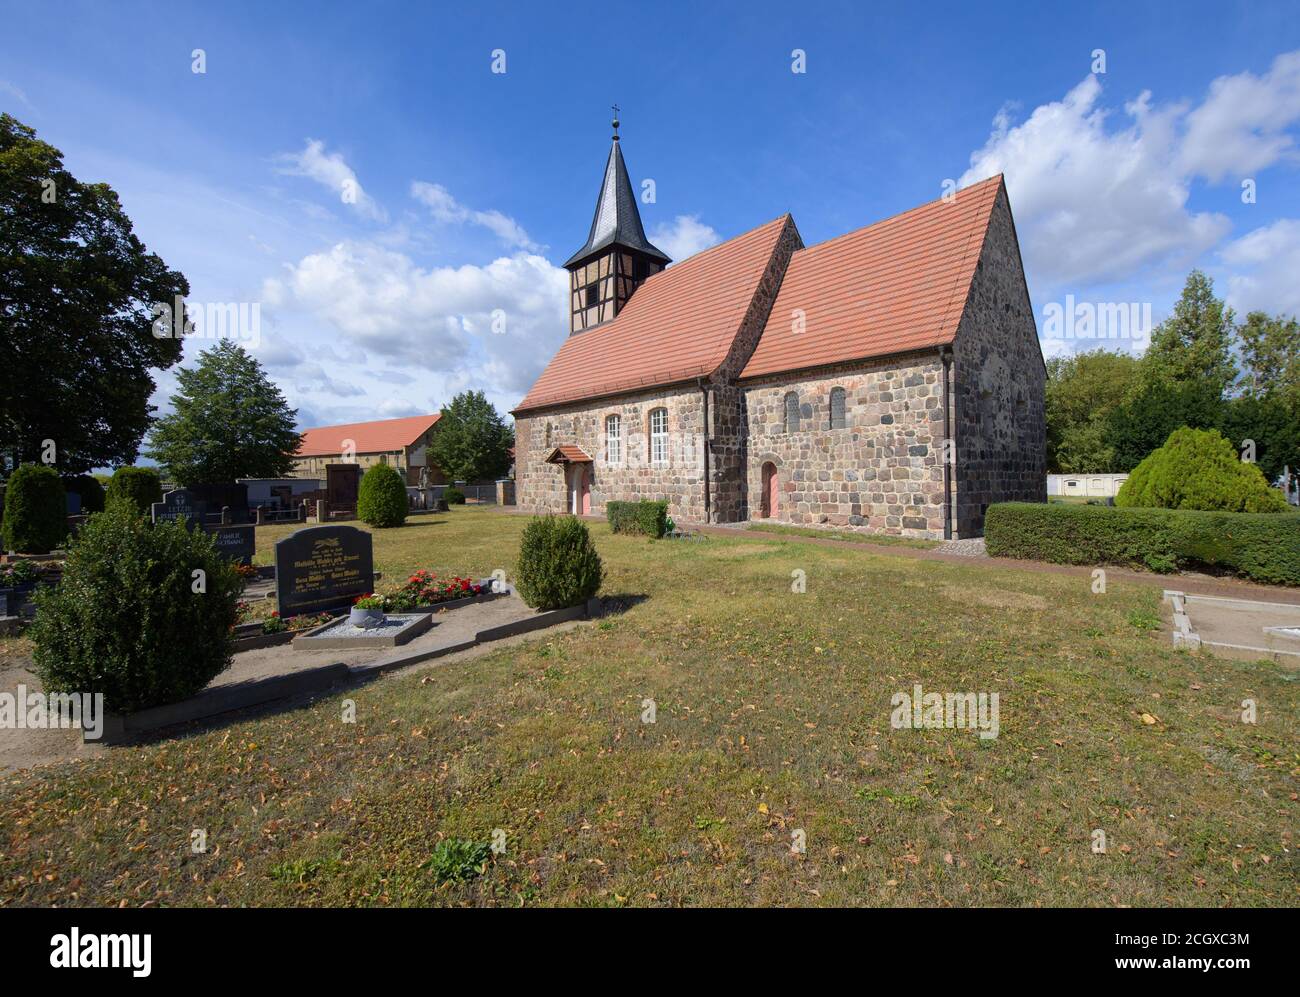 27 August 2020, Brandenburg, Trebbin/Ot Thyrow: The church in the centre of the village is a Romanesque fortified church from the 13th century. The building, which burned out during the 30-year war, was rebuilt in the 17th century and belonged to the diocese of Meissen until the Middle Ages. Afterwards the village together with the fieldstone church was sold to the bailiwick Trebbin. By the way, the first bell was cast in Magdeburg as early as 1590, but had to be recast many years later because of its impure sound. Photo: Soeren Stache/dpa-Zentralbild/ZB Stock Photo